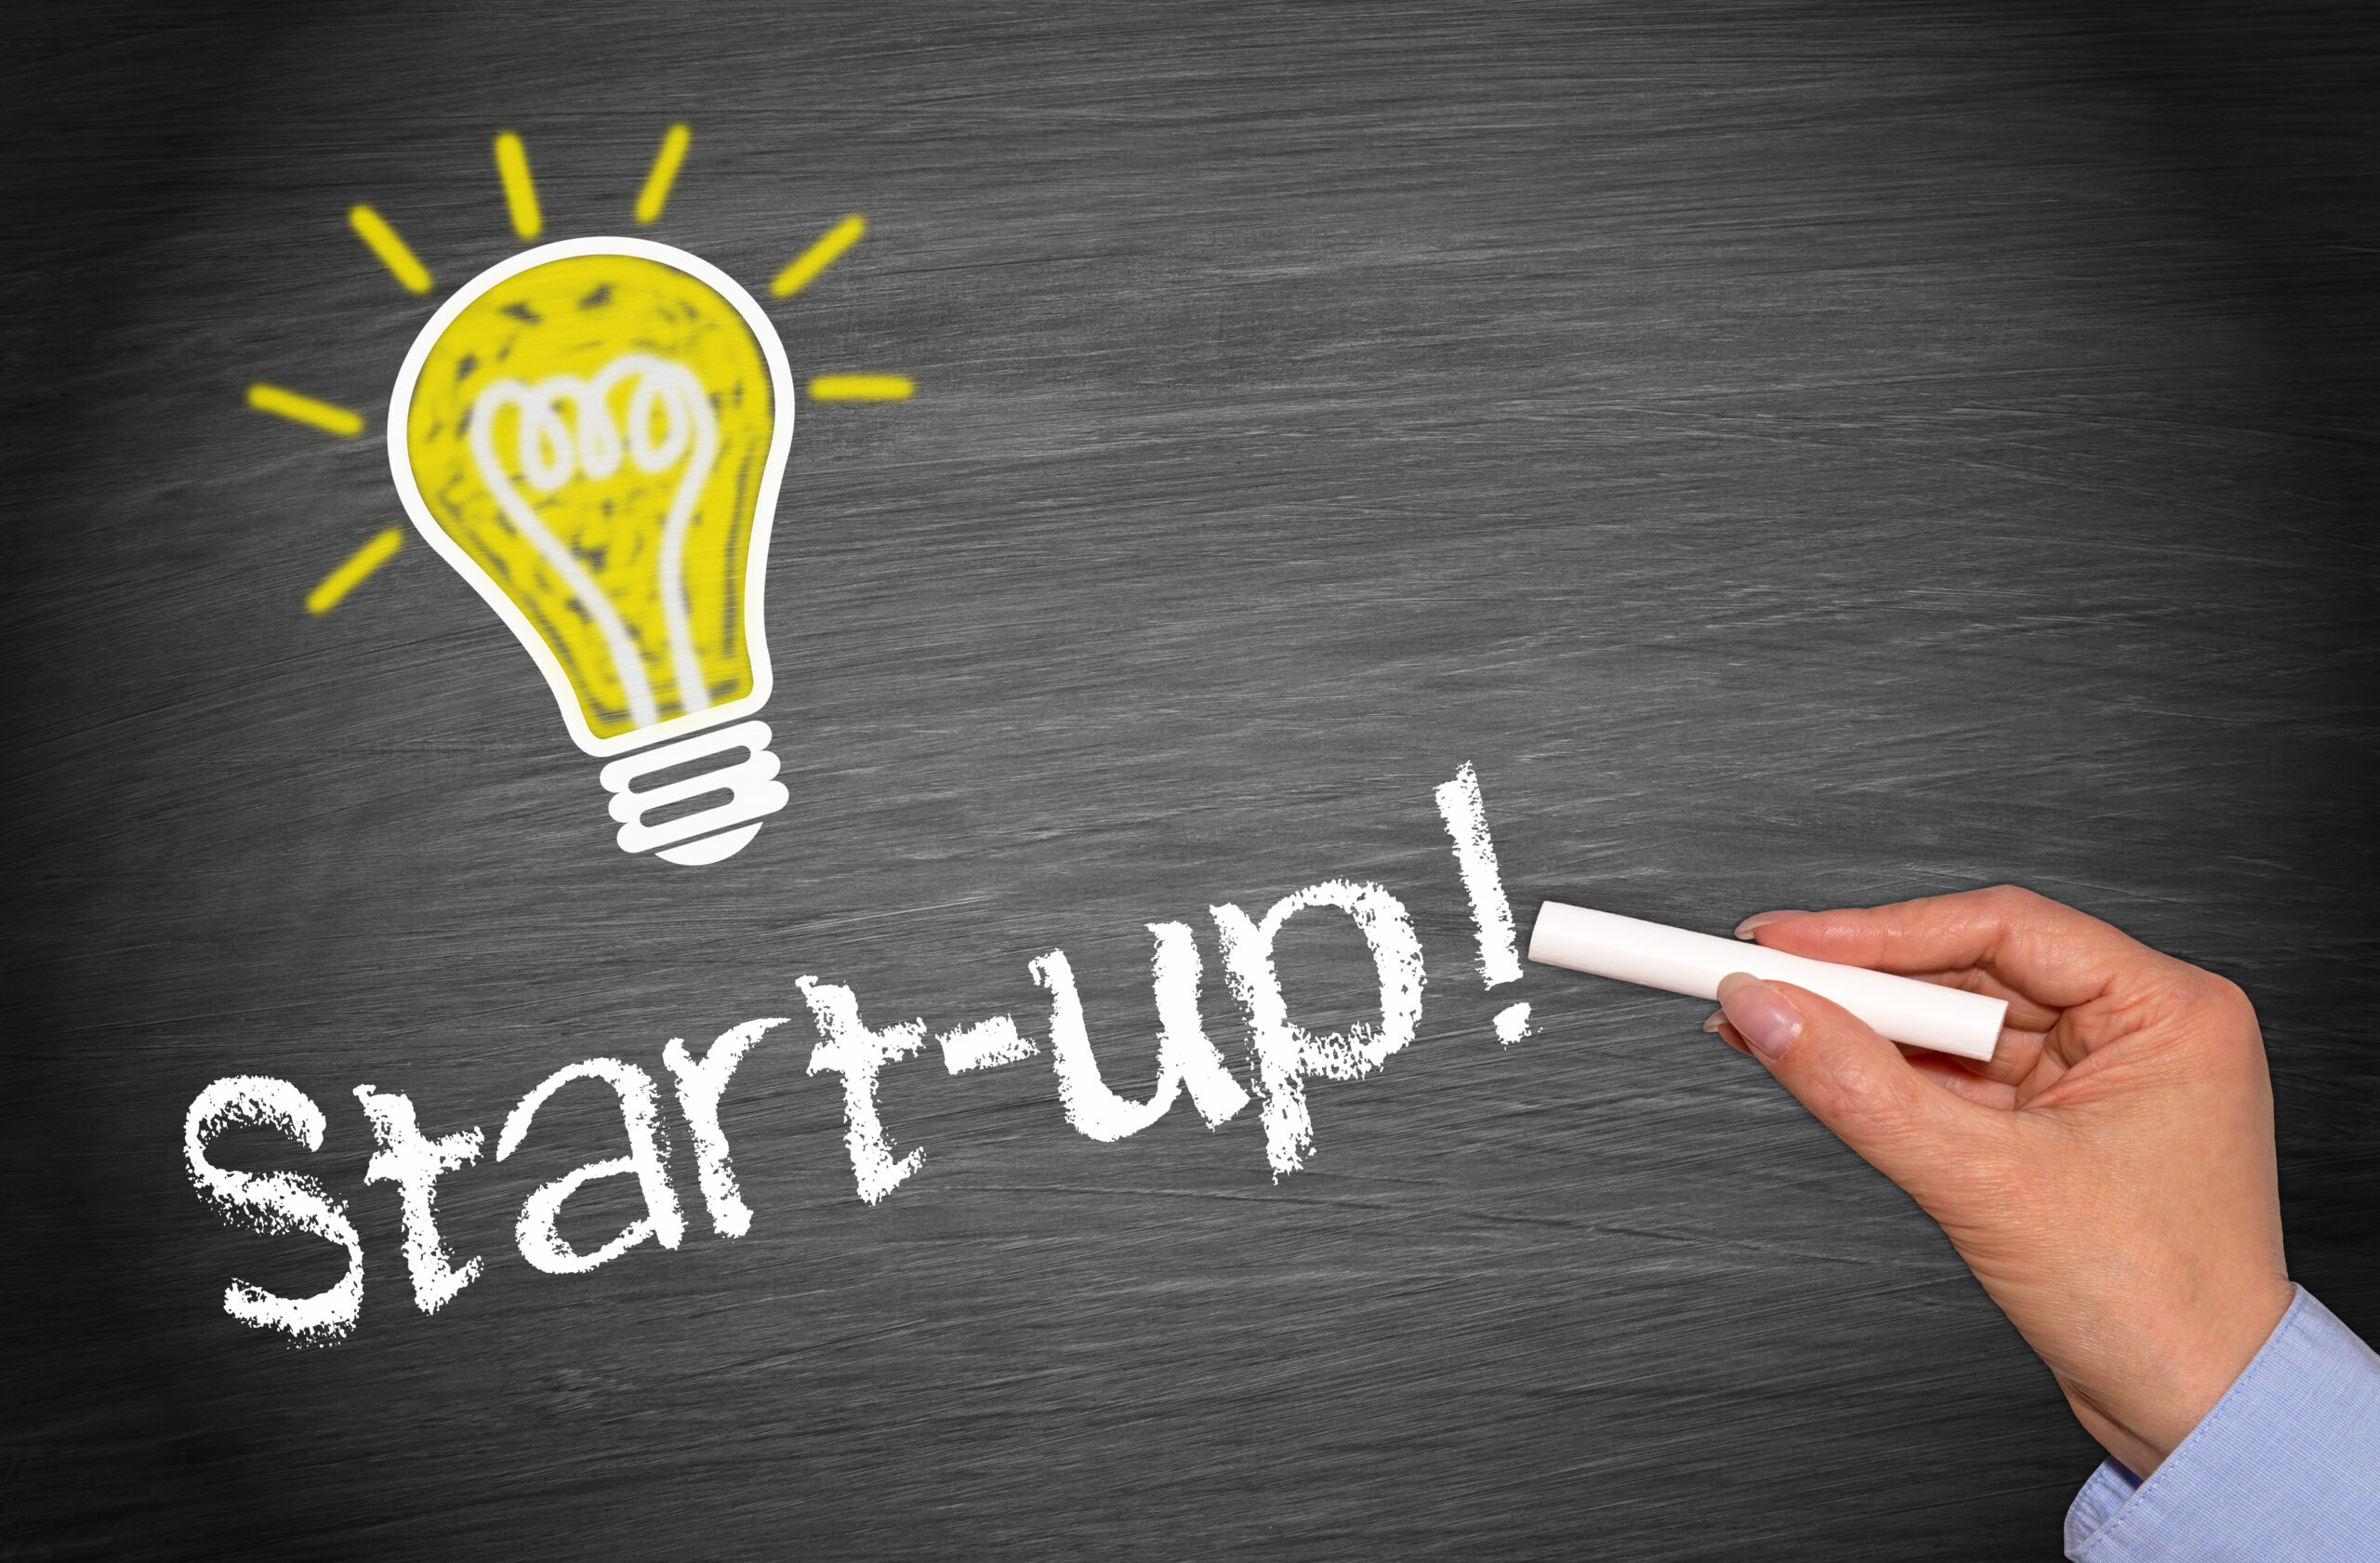 Start-up,-,Business,And,Innovation,Concept